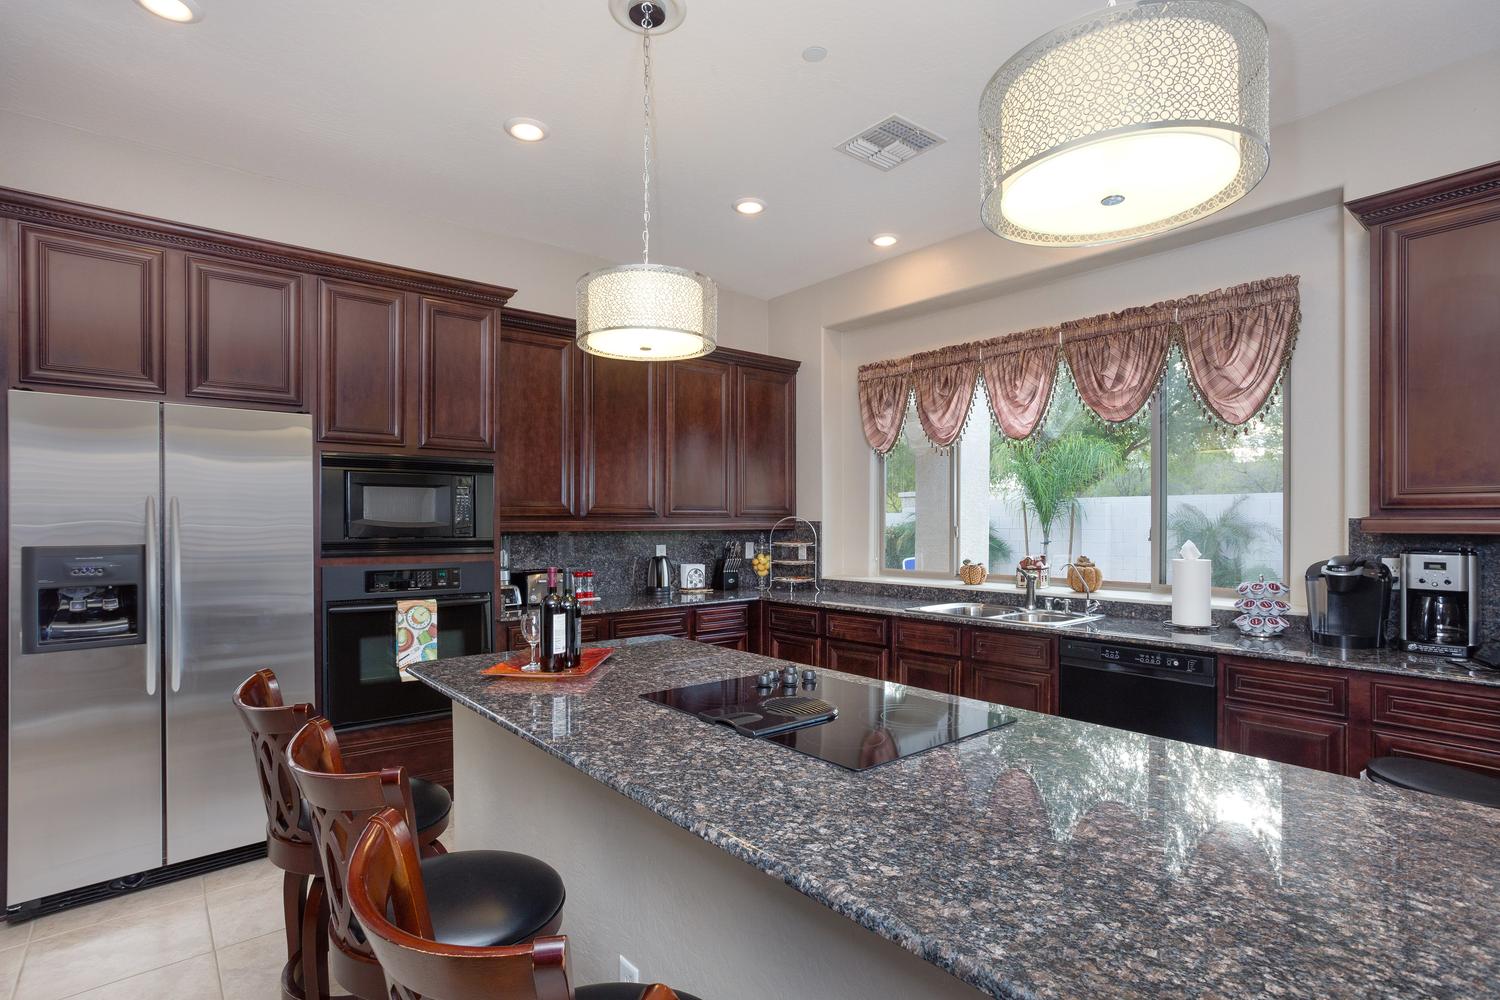 Granite counter tops in the kitchen